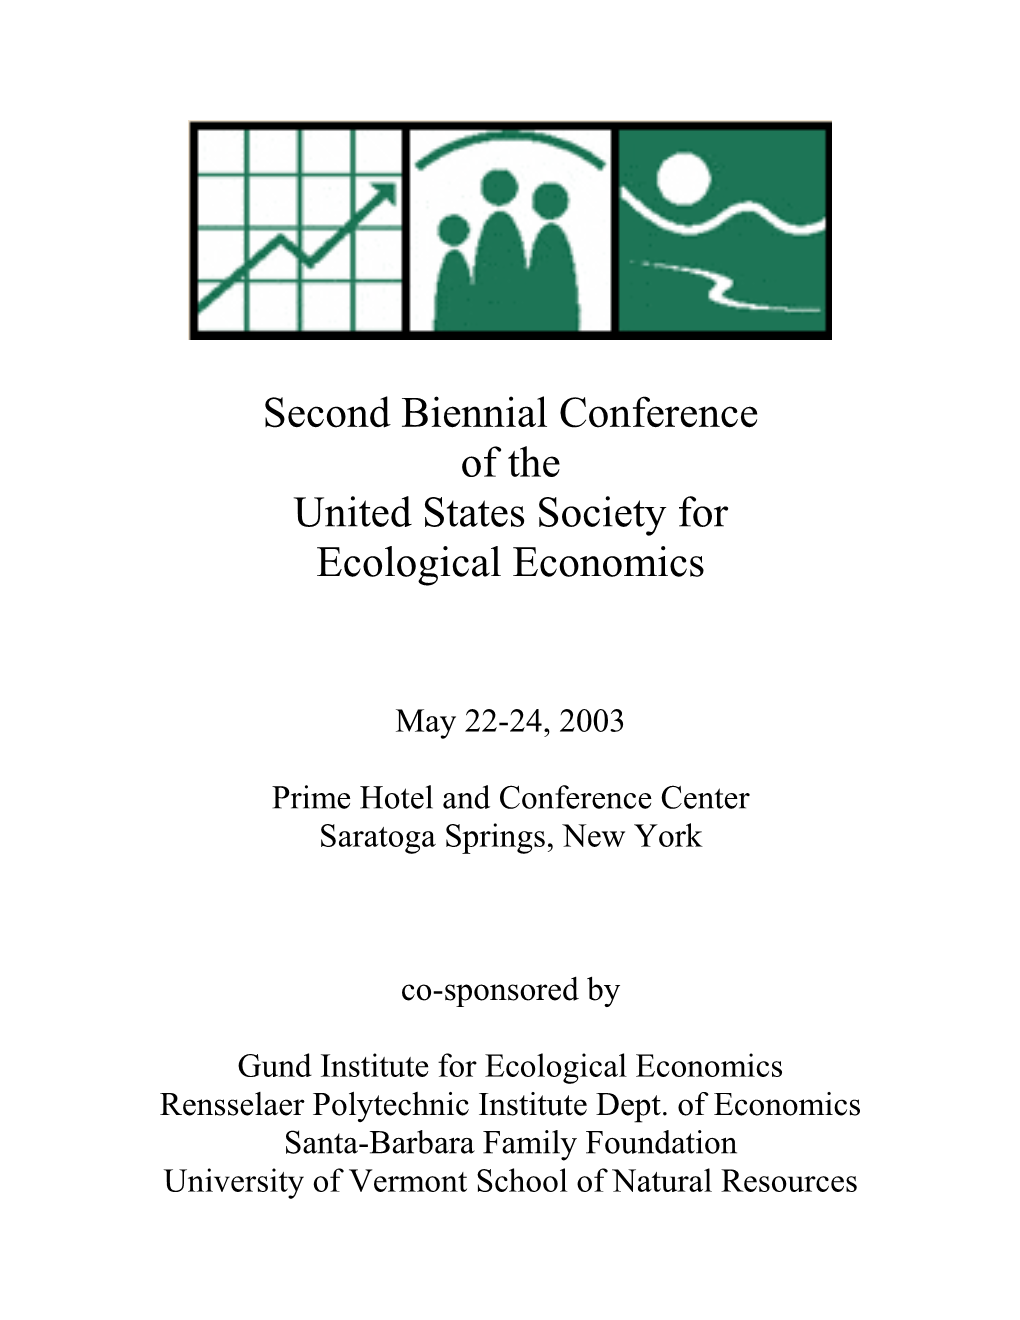 Second Biennial Conference of the United States Society for Ecological Economics